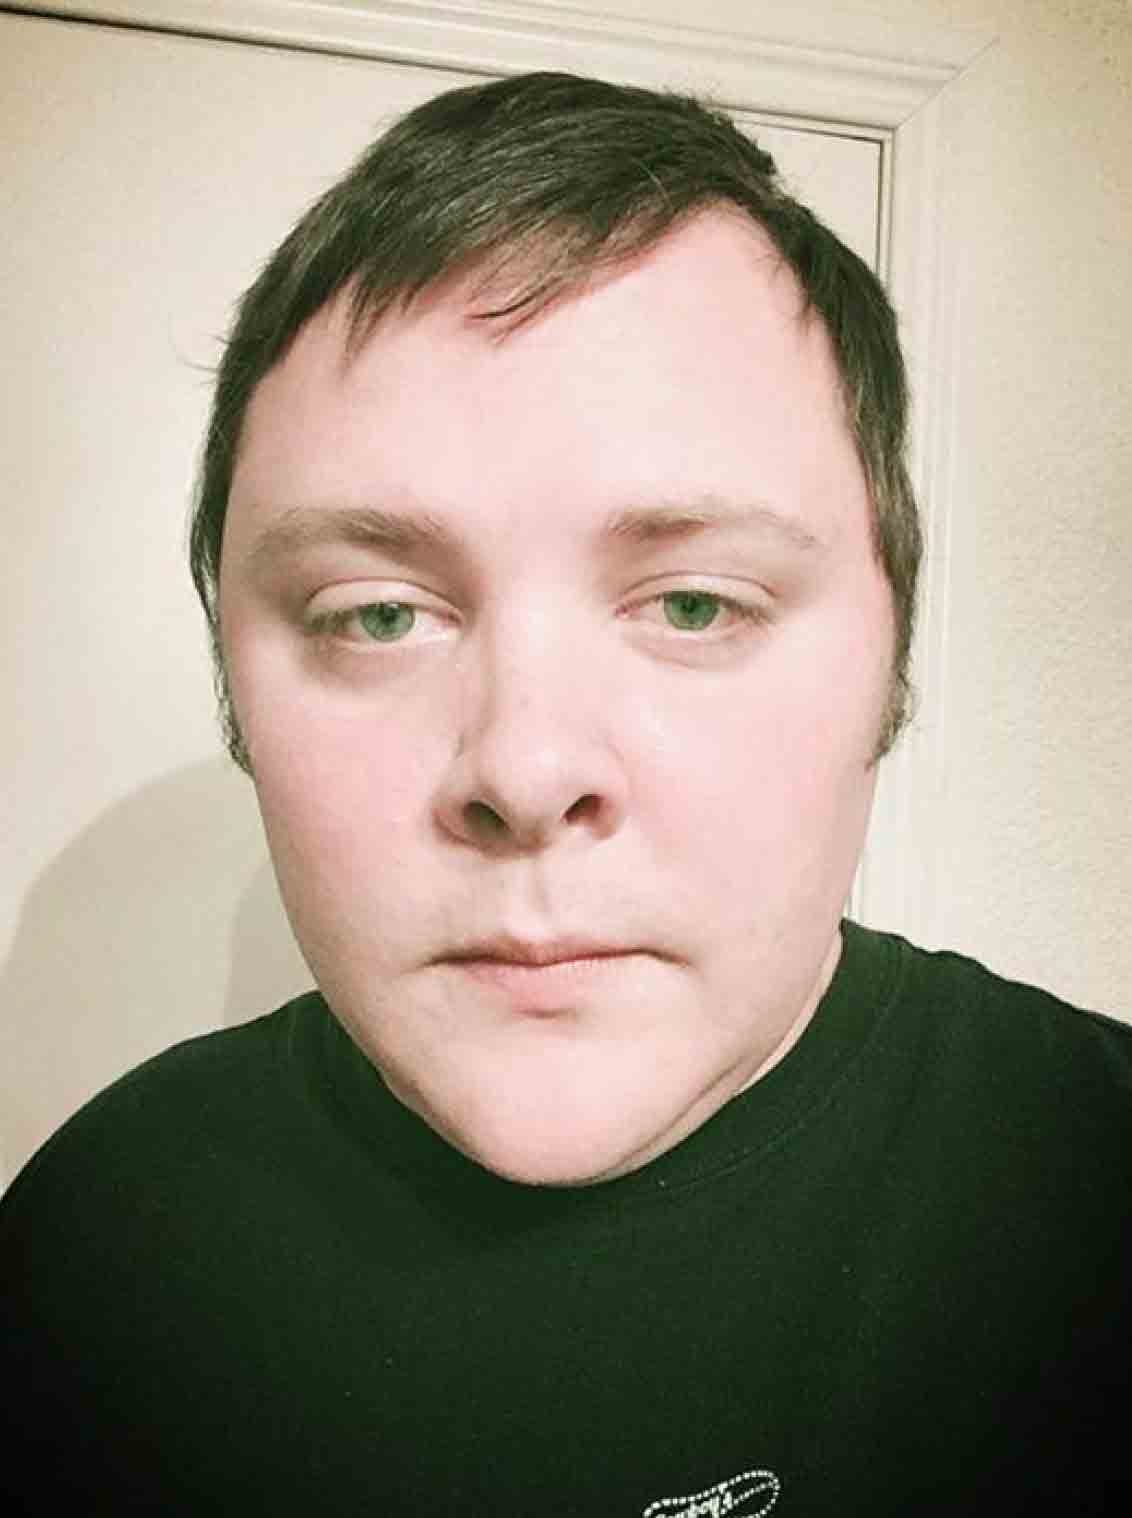 Texas Church Shooter Reportedly ID’d As Air Force Vet, 26, Once Accused Of Assaulting Spouse